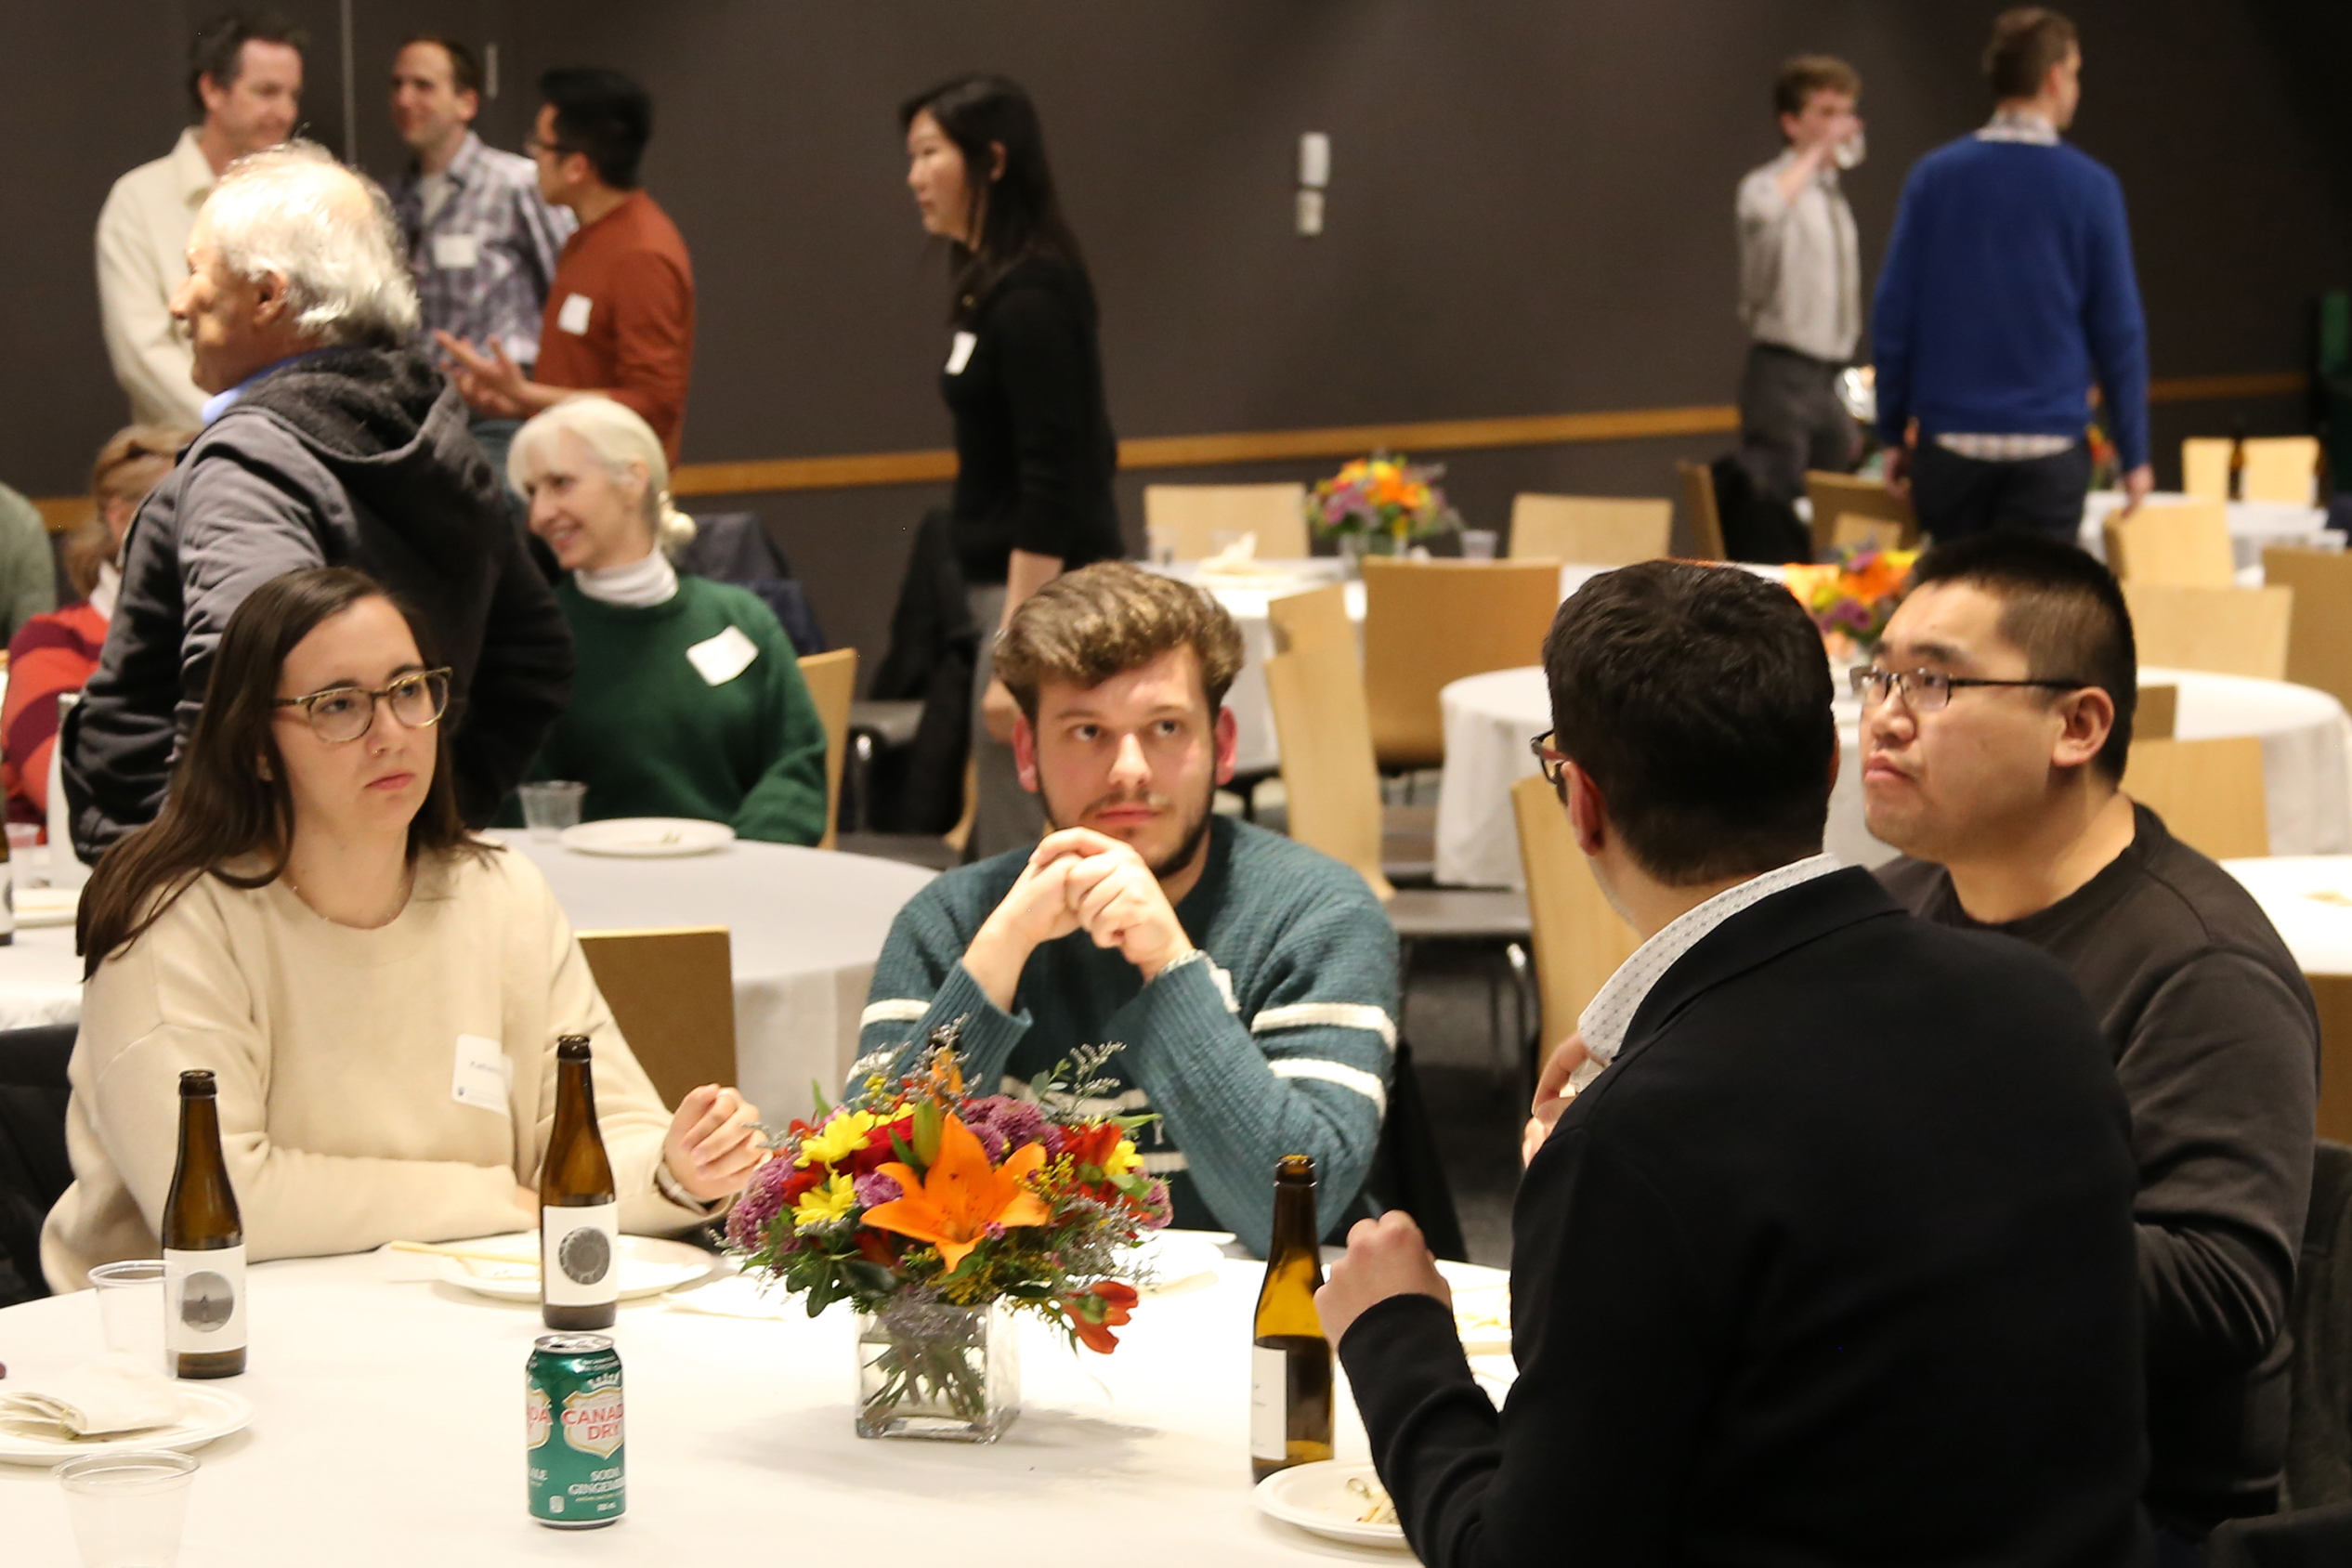 Attendees conversing at the 2023 Mark Zacher Lecture